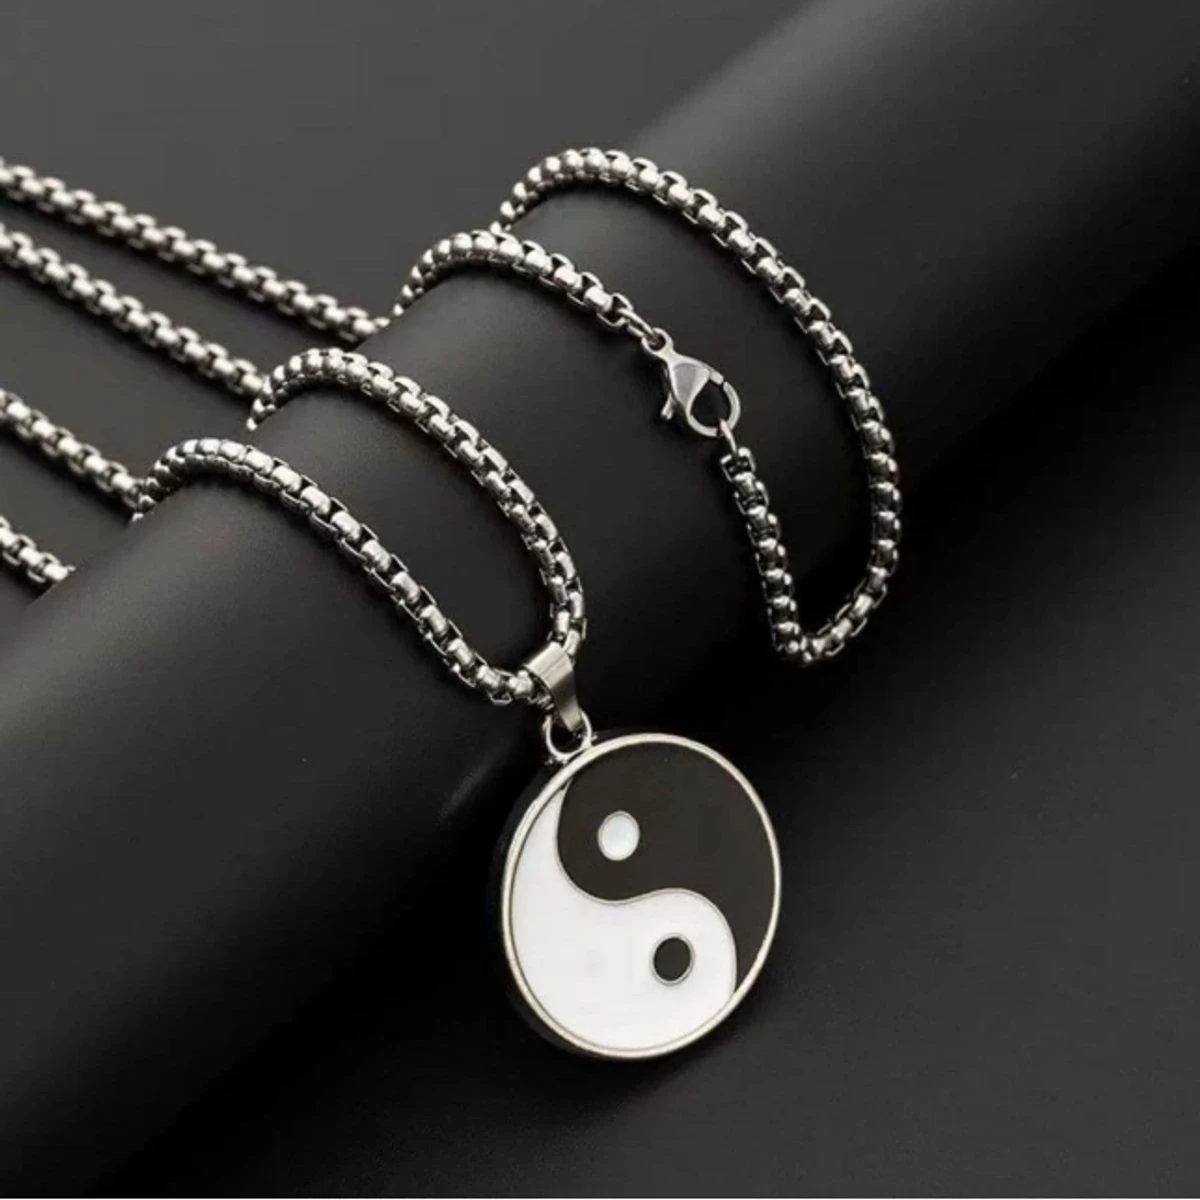 Fashionable New Stainless Steel Necklace For Men